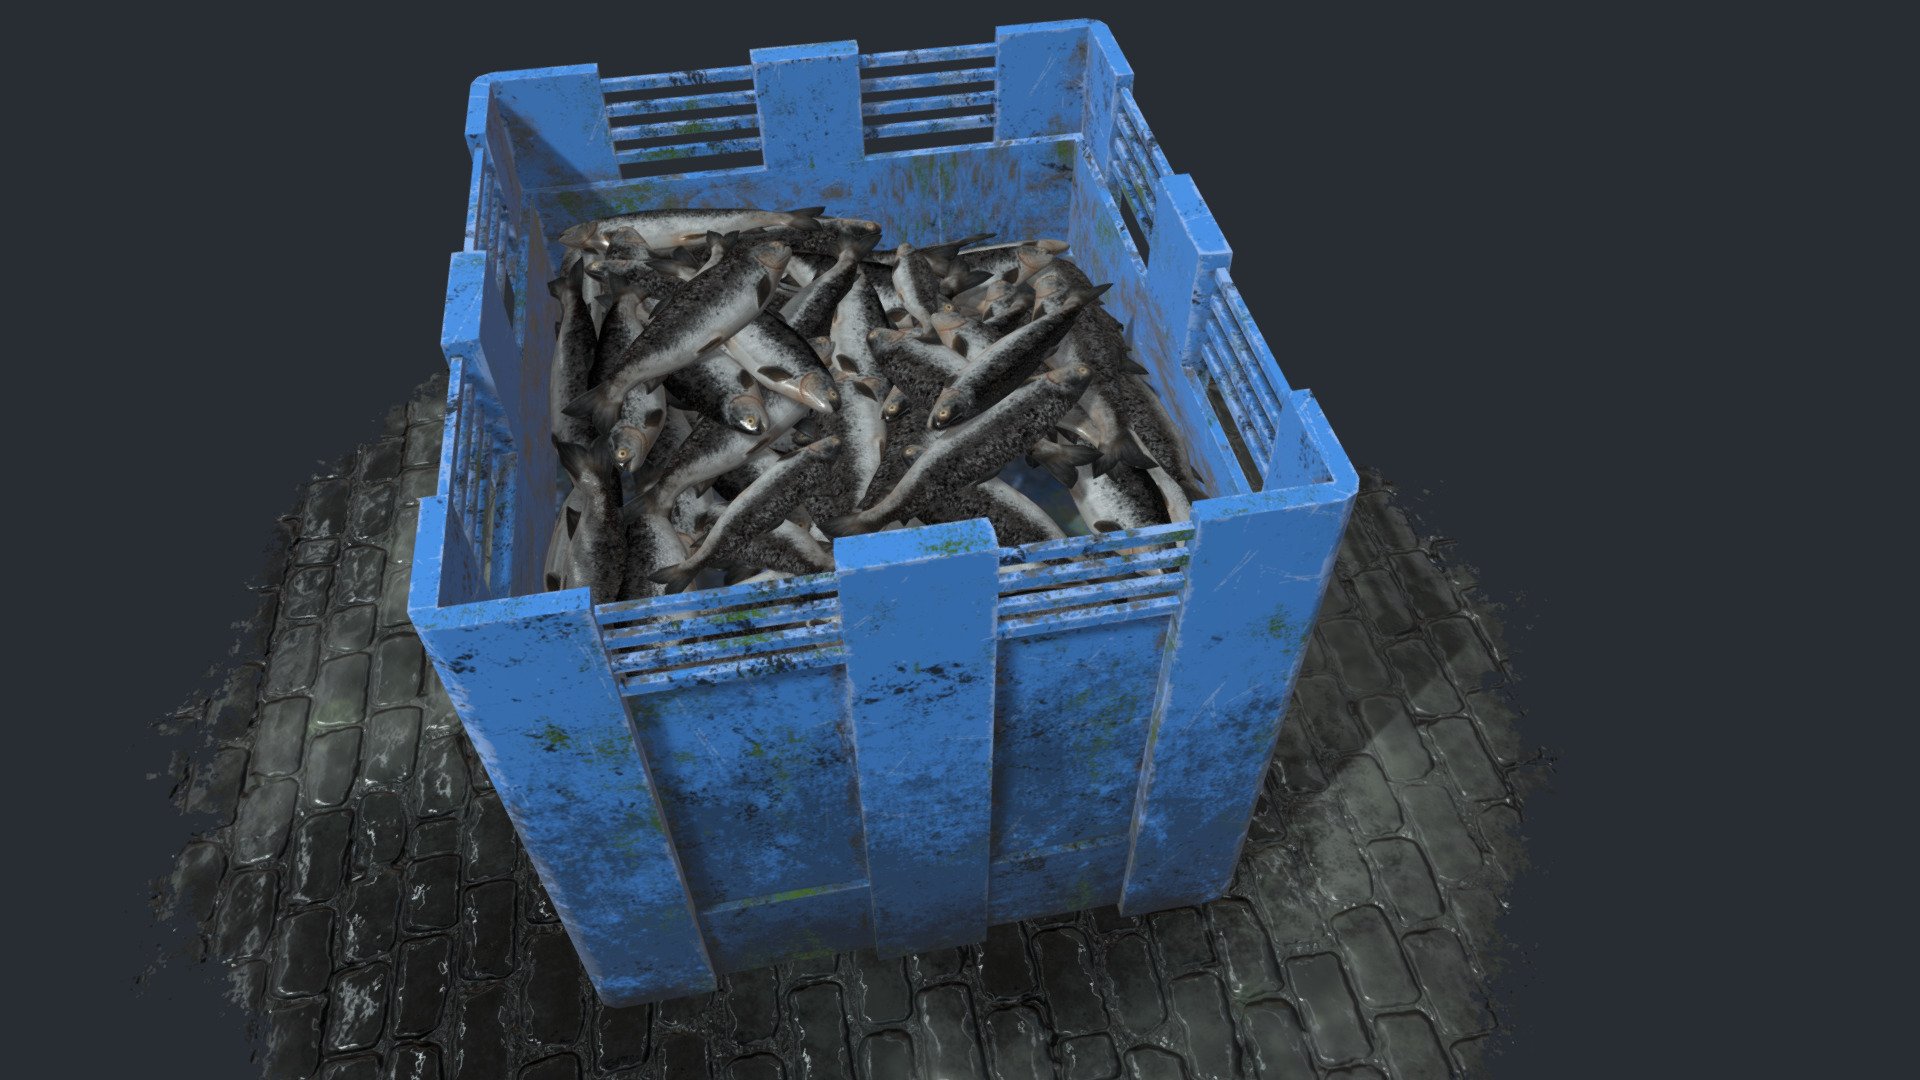 Fish Basket.
Made on Maya, Zbrush and Substance Painter, - Fish Basket - 3D model by carlosvasc670 3d model